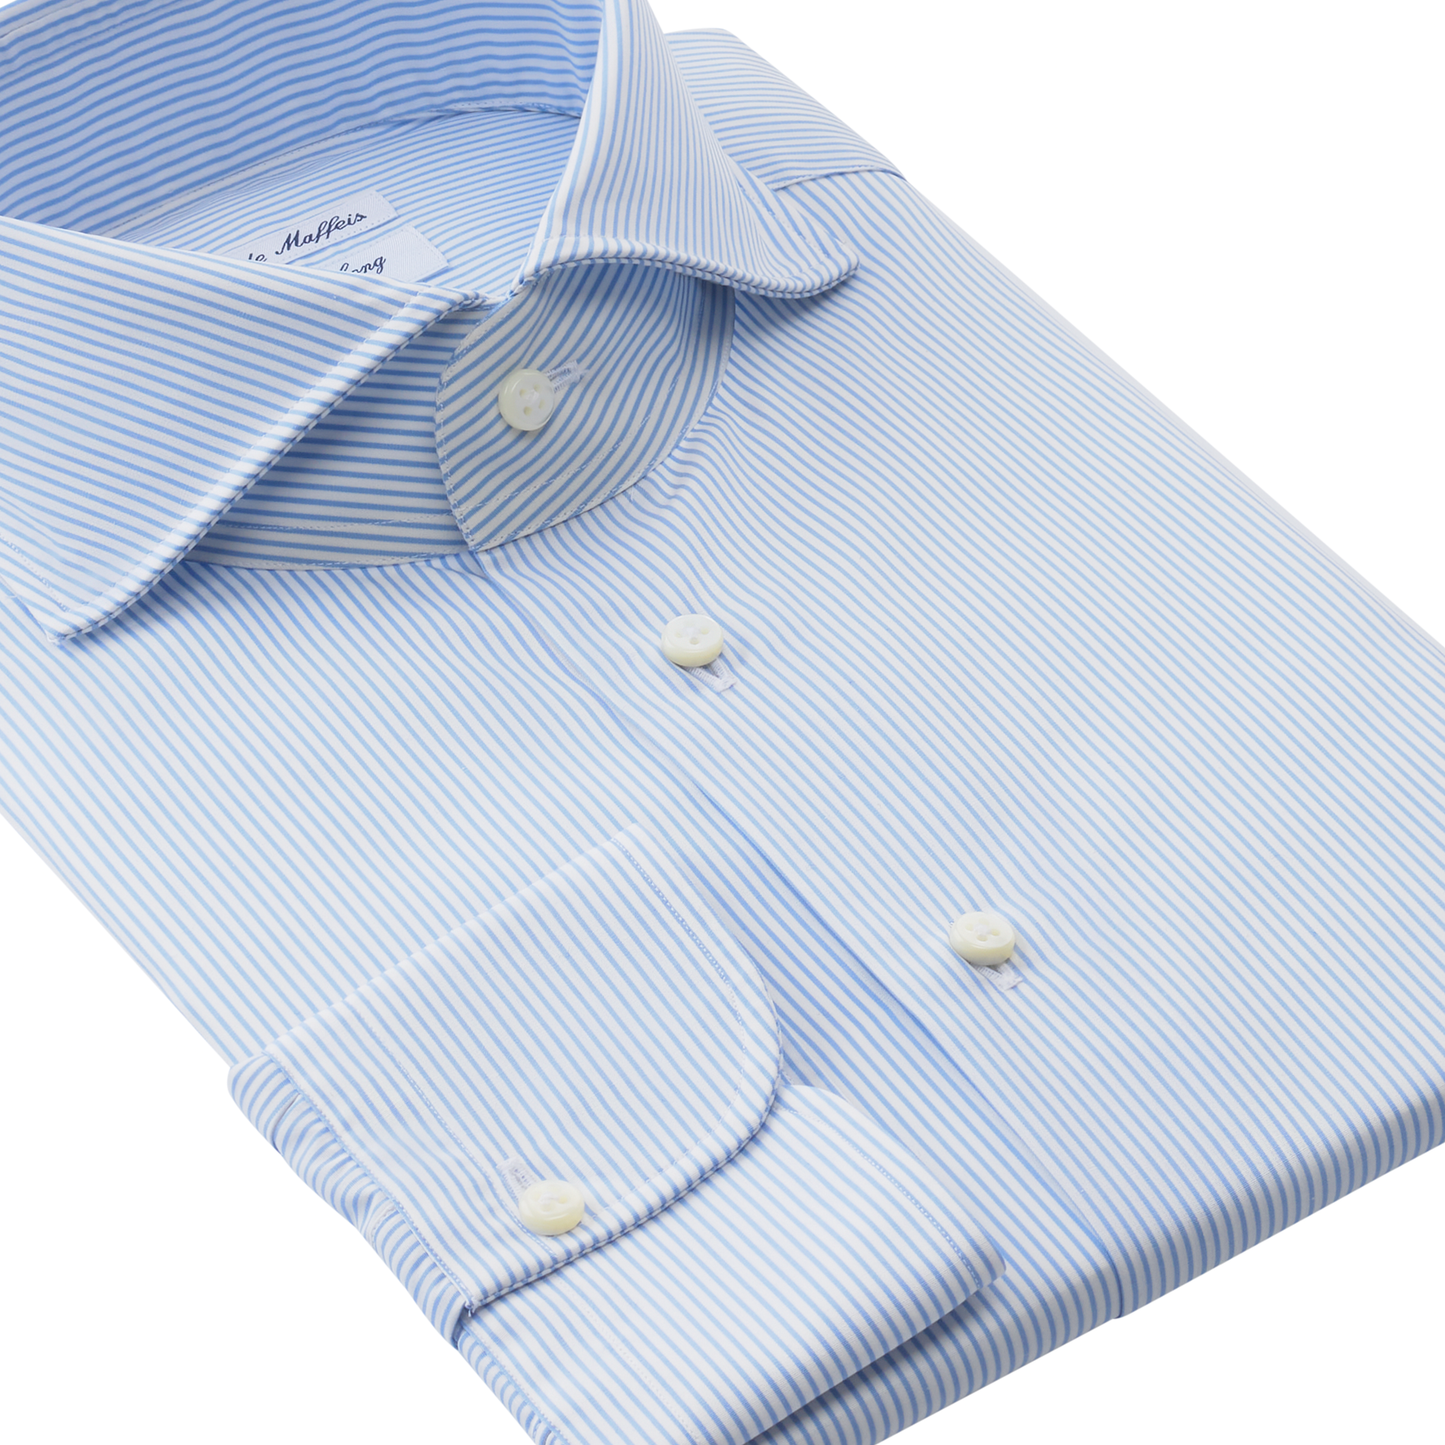 Emanuele Maffeis "All Day Long Collection" Striped Cotton Light Blue Shirt with Shark Collar - SARTALE